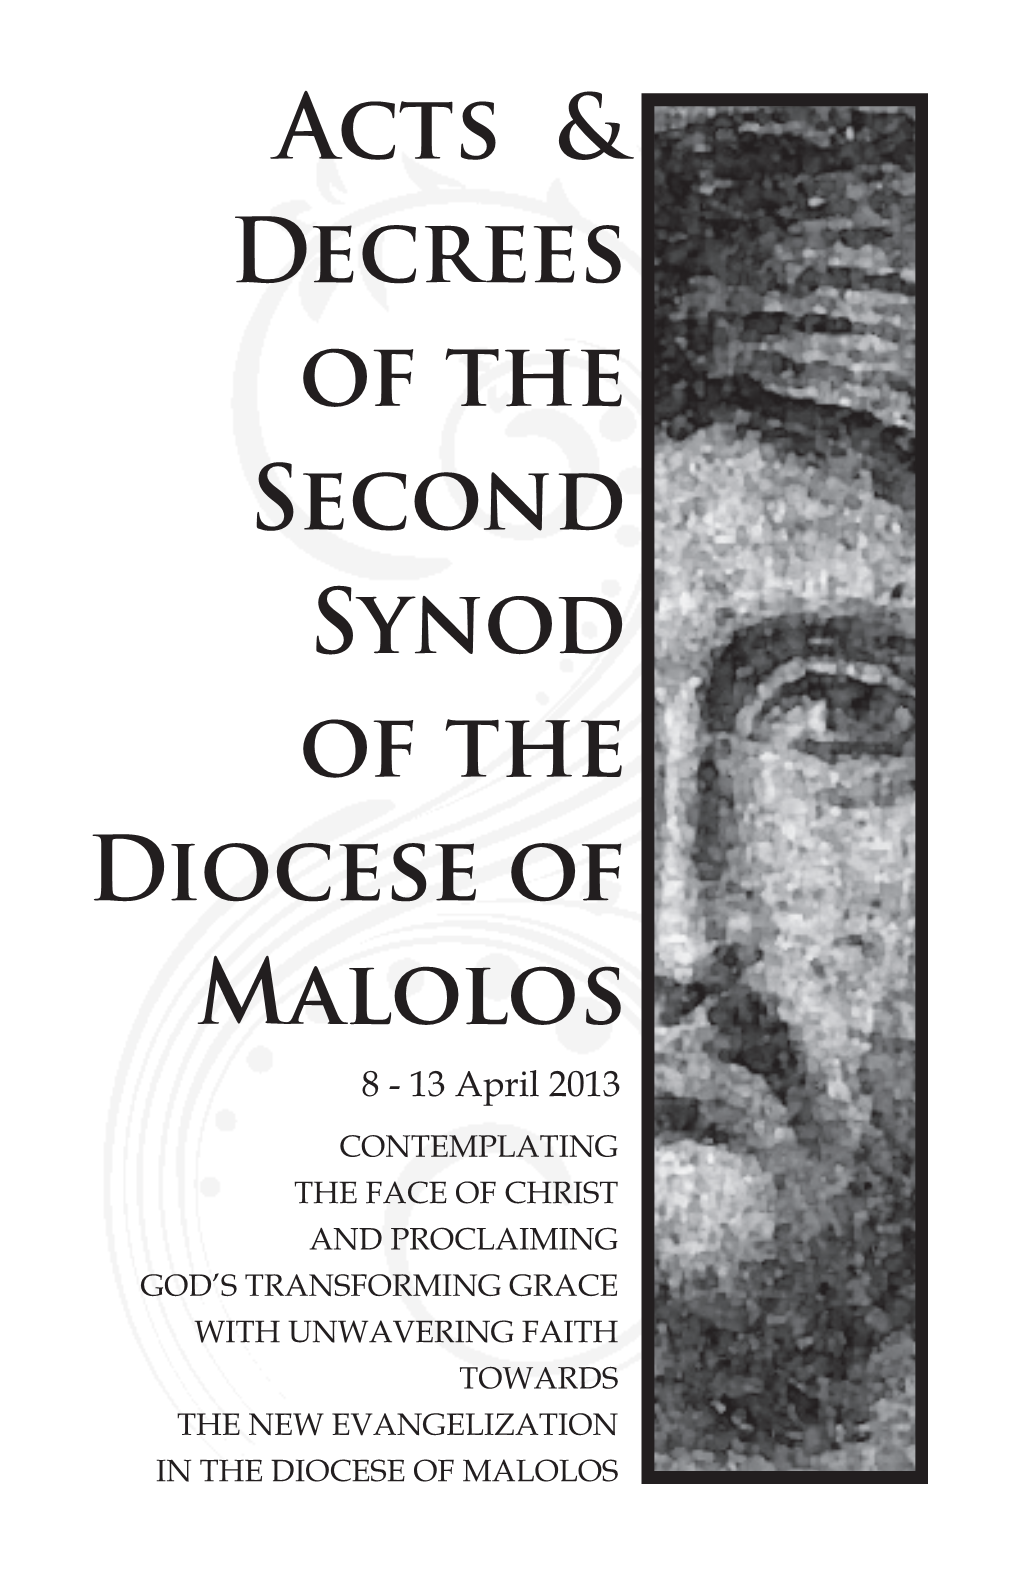 Acts & Decrees of the Second Synod of the Diocese of Malolos